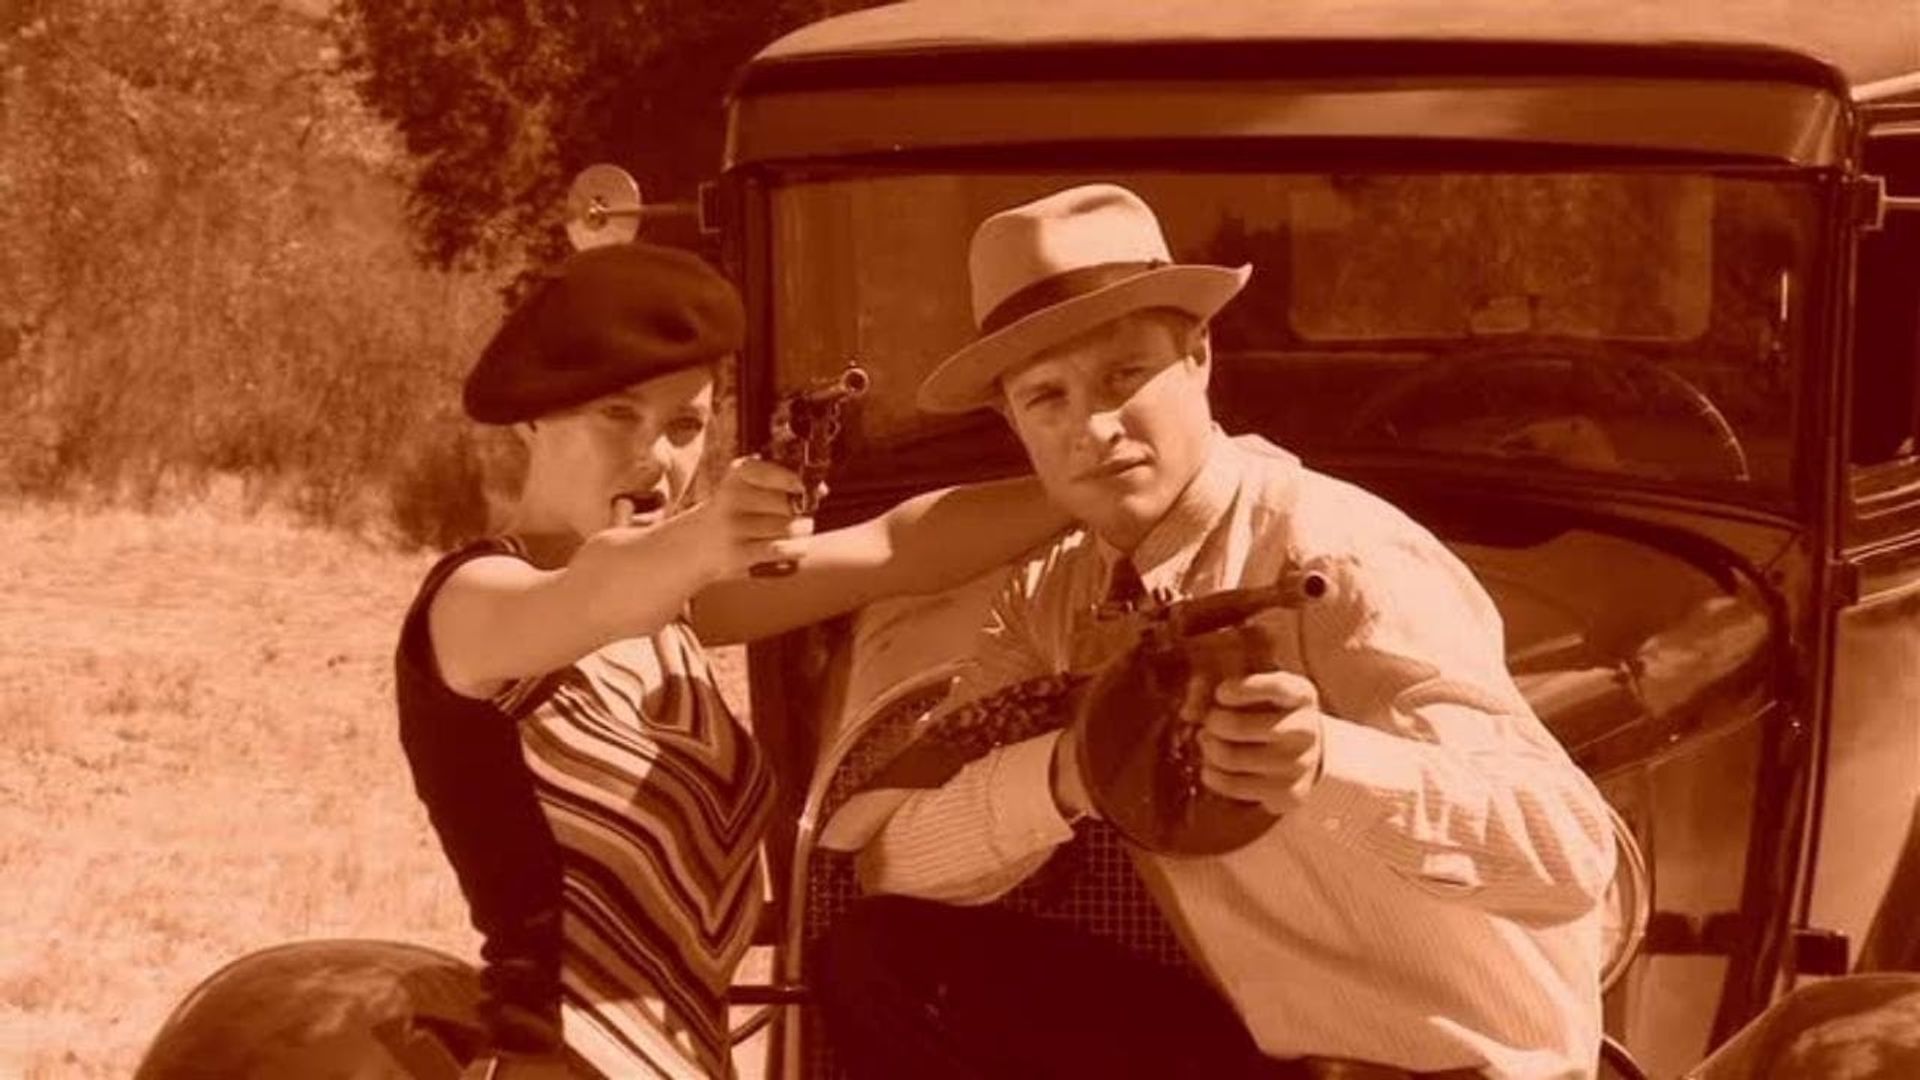 Bonnie & Clyde: Justified background